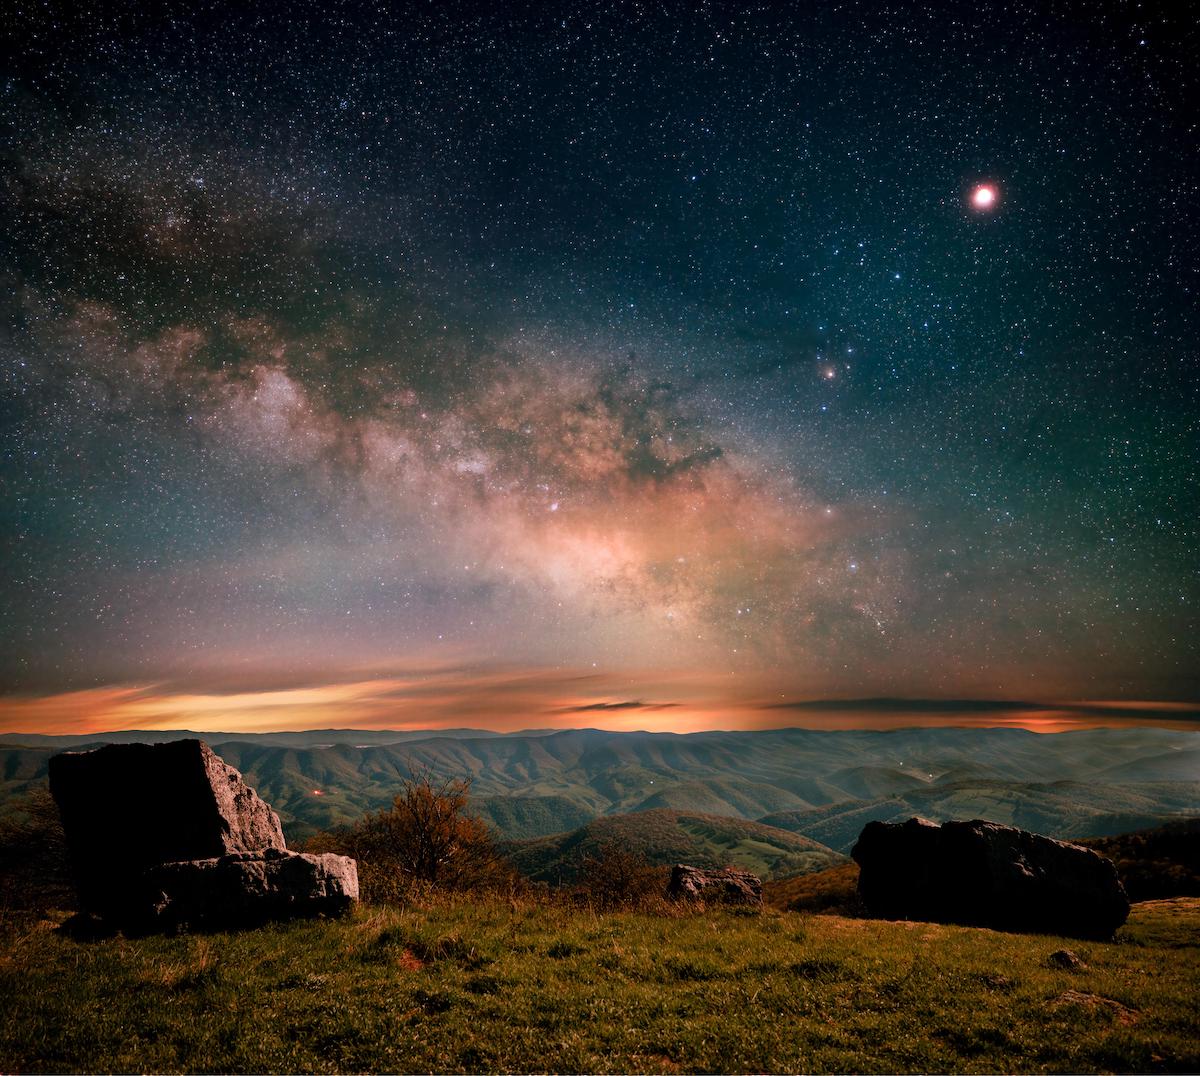 Milky Way and Total Lunar Eclipse Photo by Dane Smith